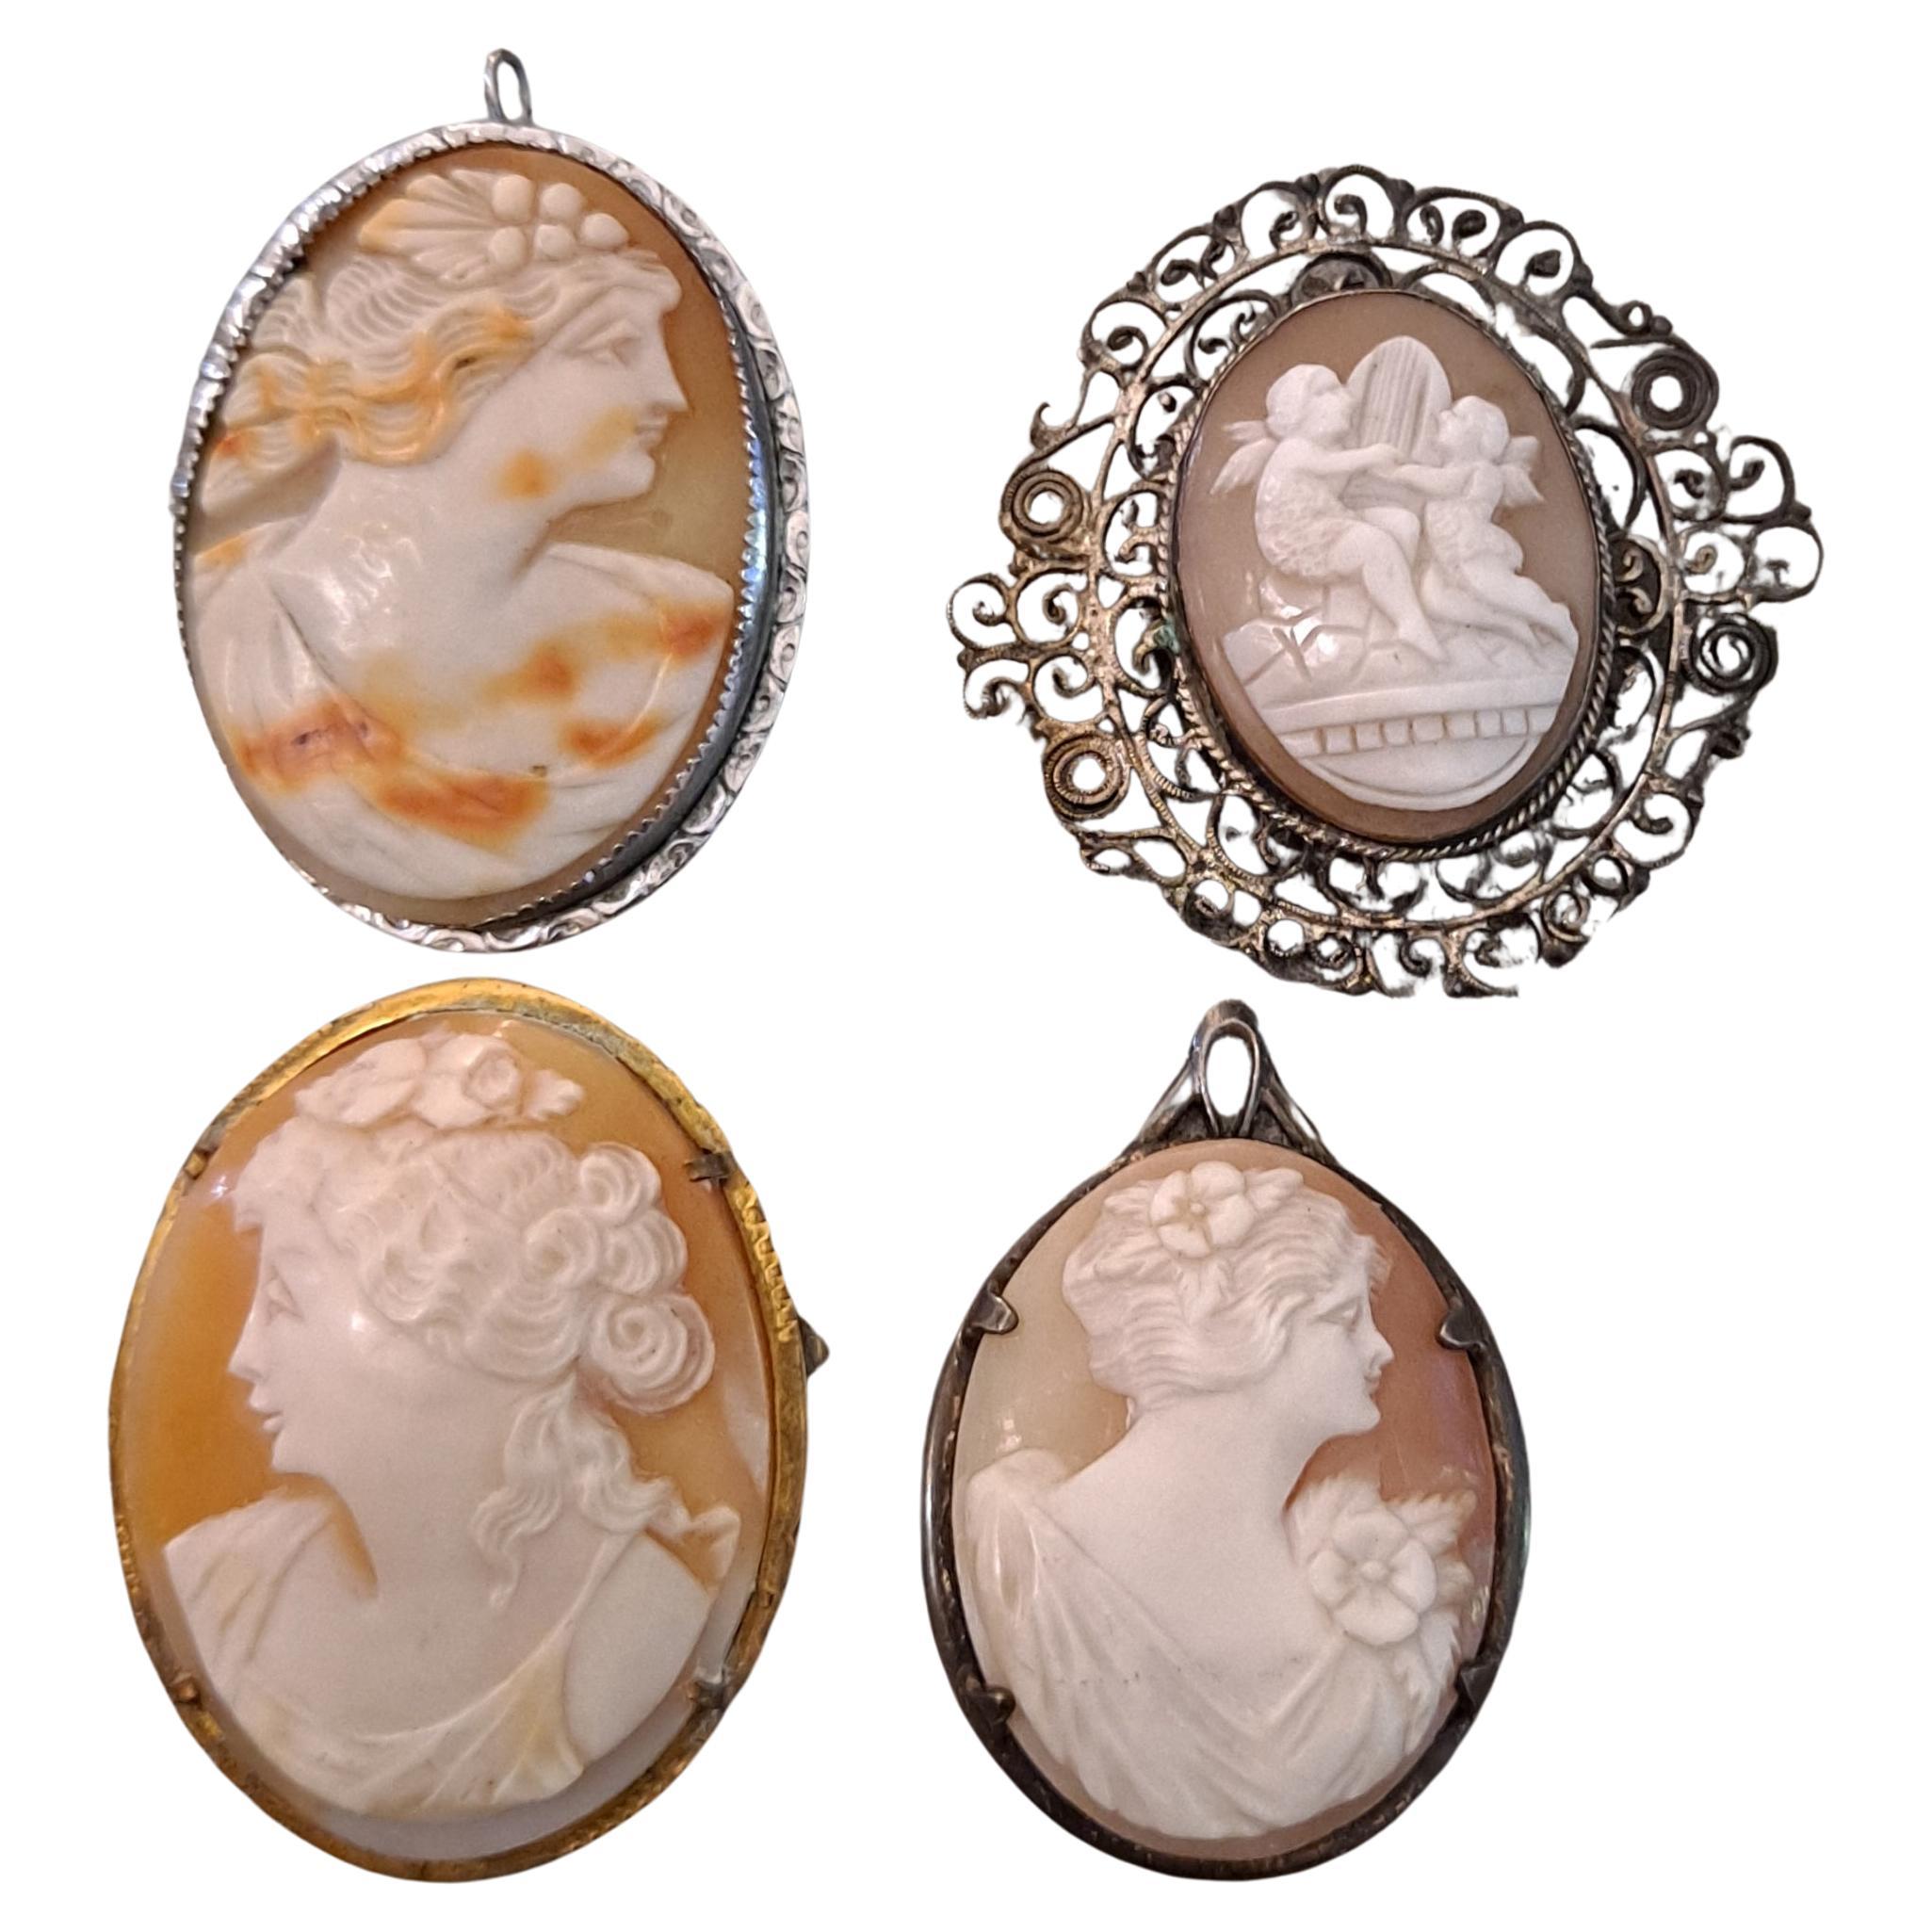 Group of 4 High Relief Cameo Pins/Pendents Carved from Bull Mouth Shell  